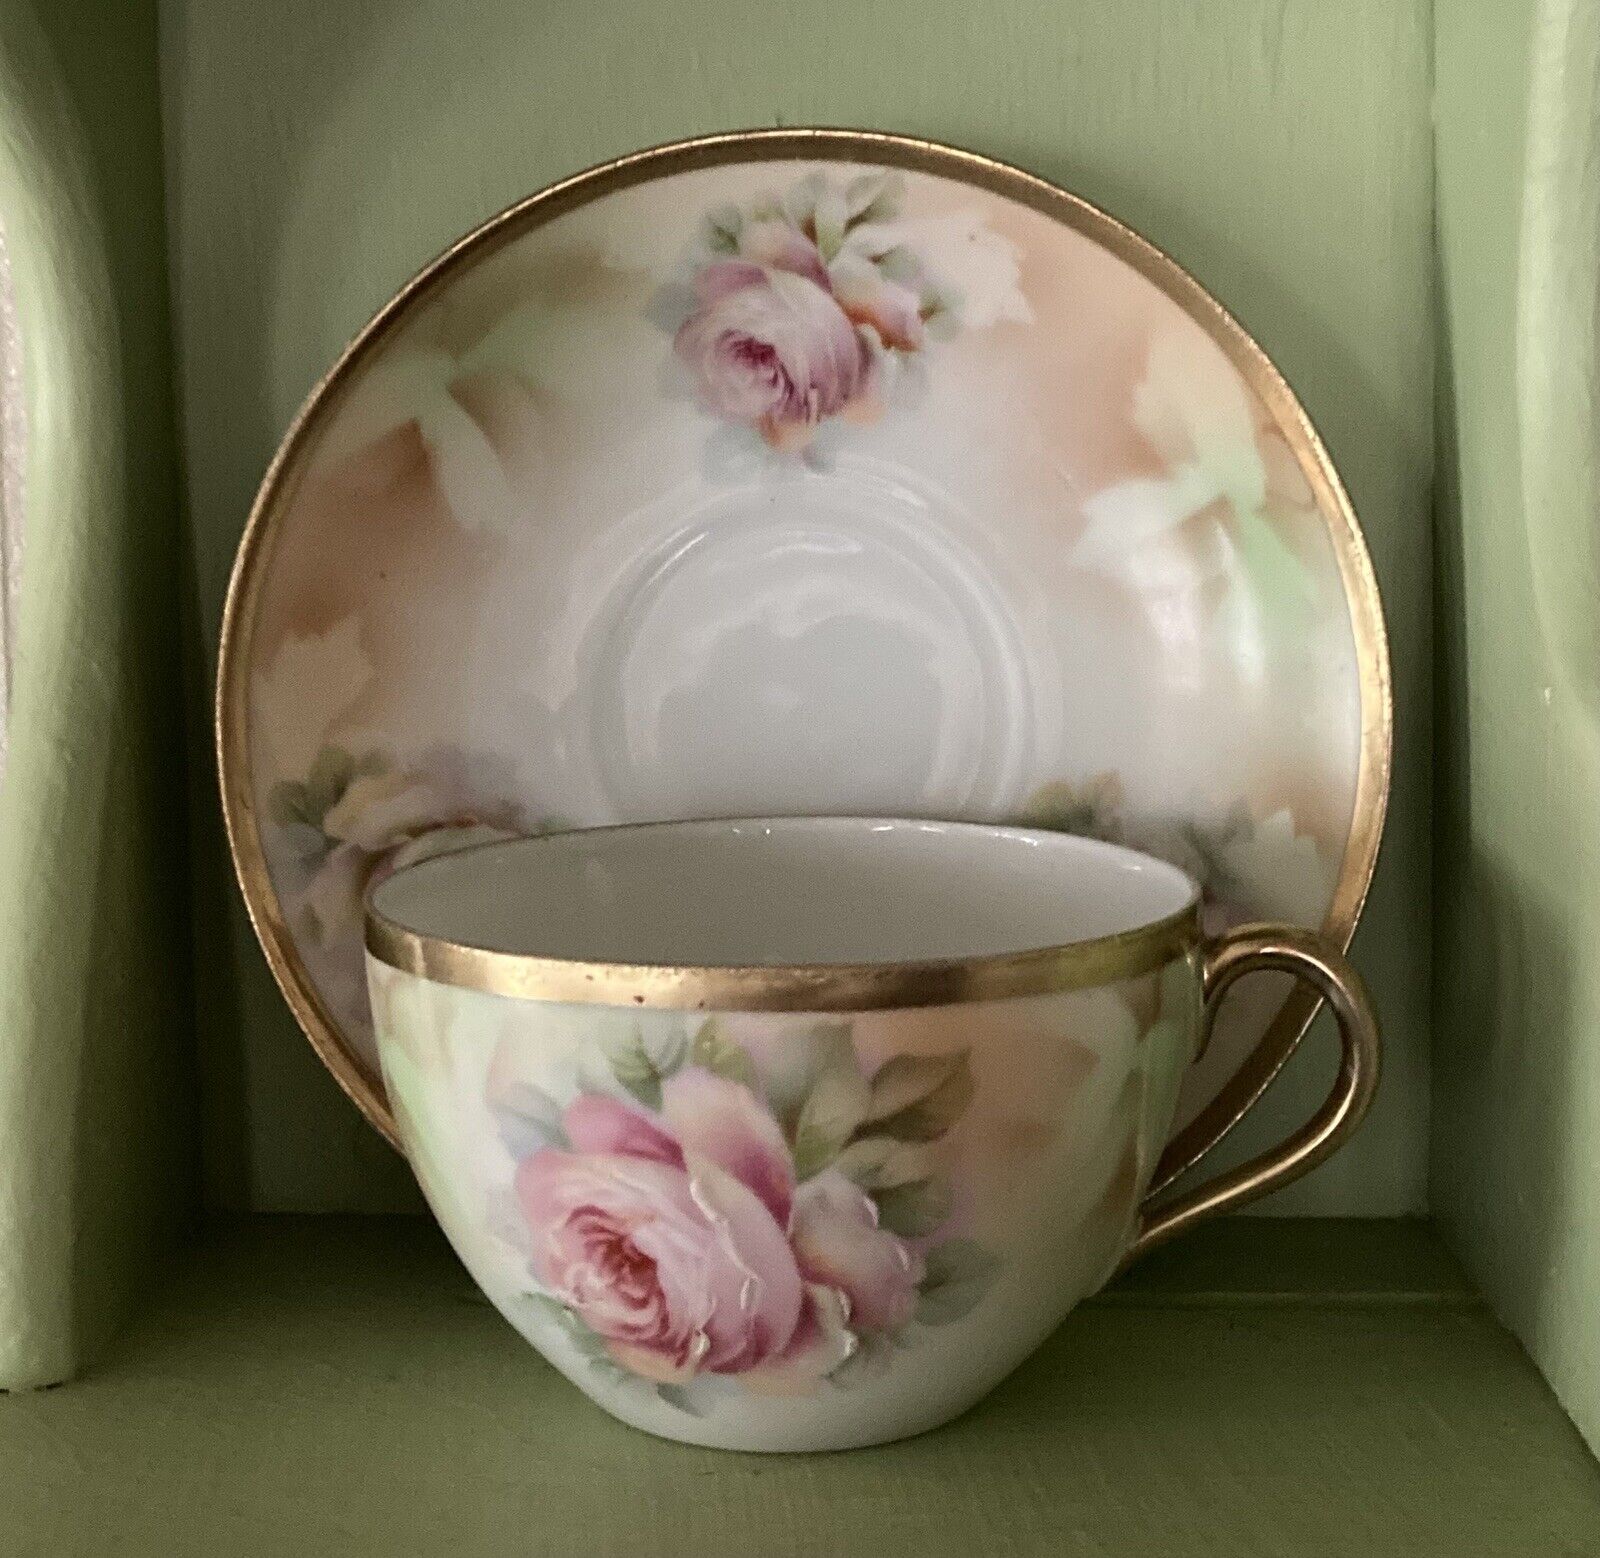 Vintage Royal Rudolstadt Prussia Teacup and Saucer with Pink Roses